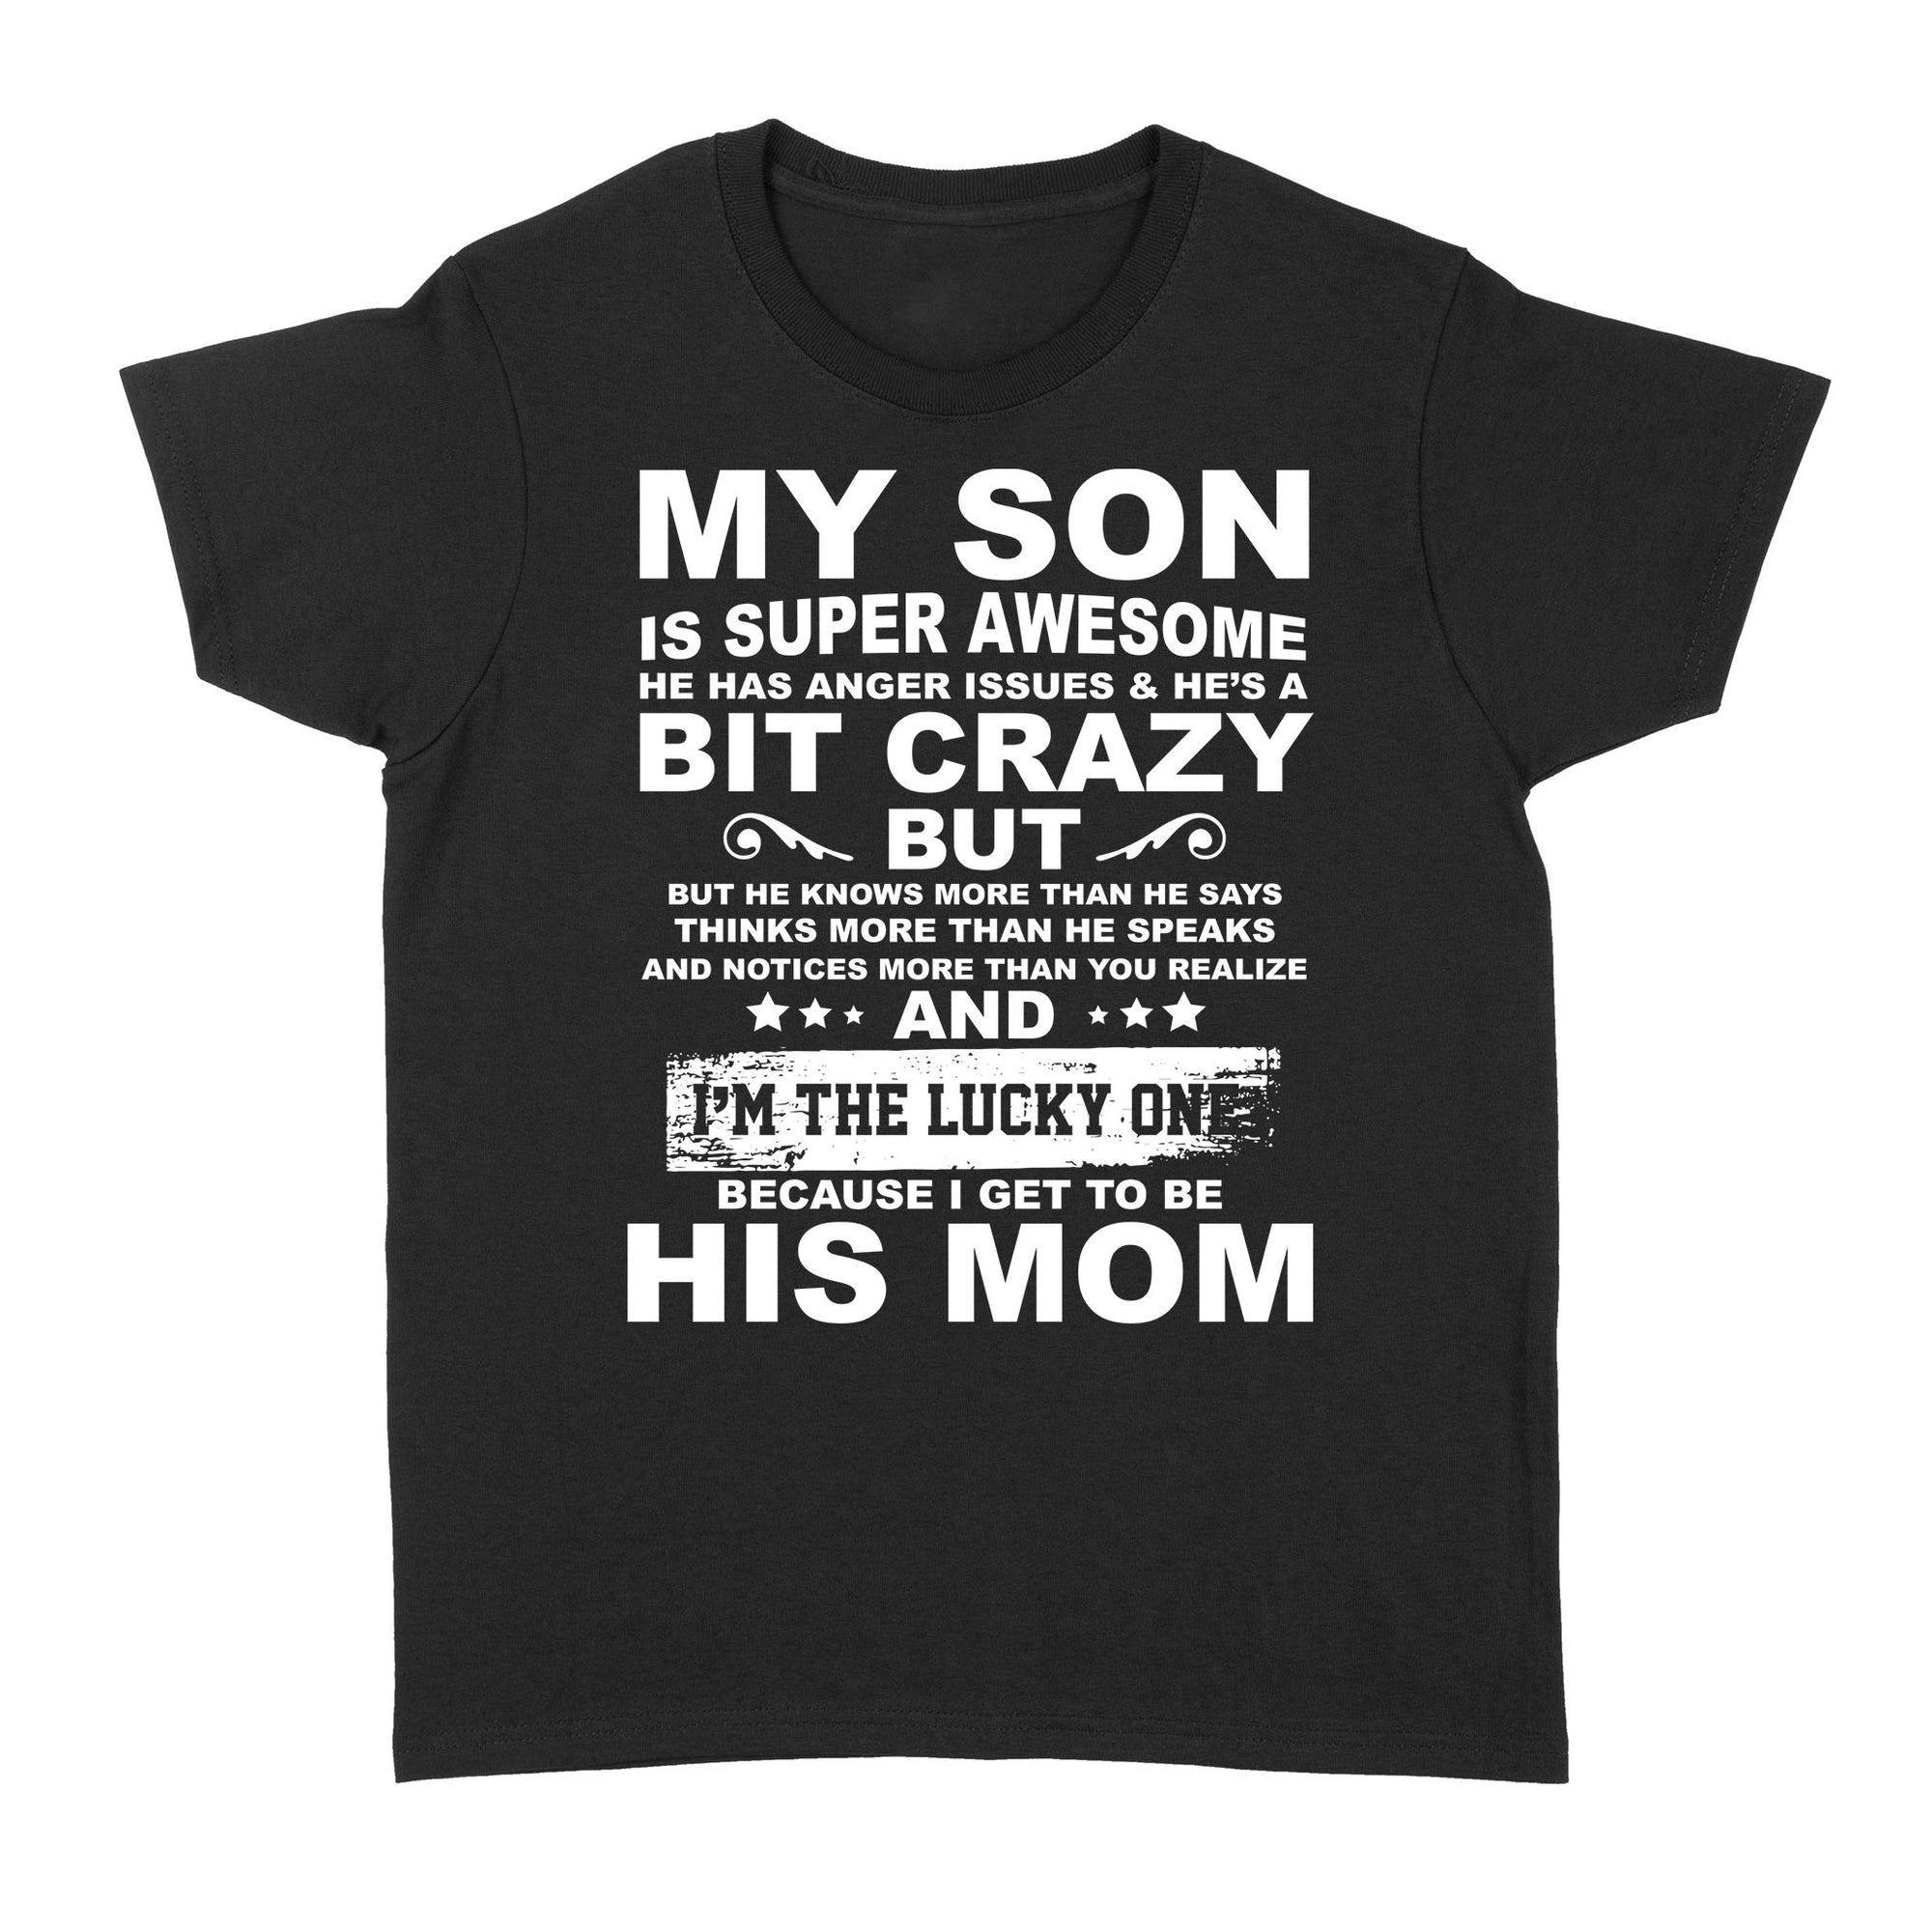 My Son Is Awesome He Has Anger Issues Crazy  I'm Lucky I Get To Be His Mom - Standard Women's T-shirt